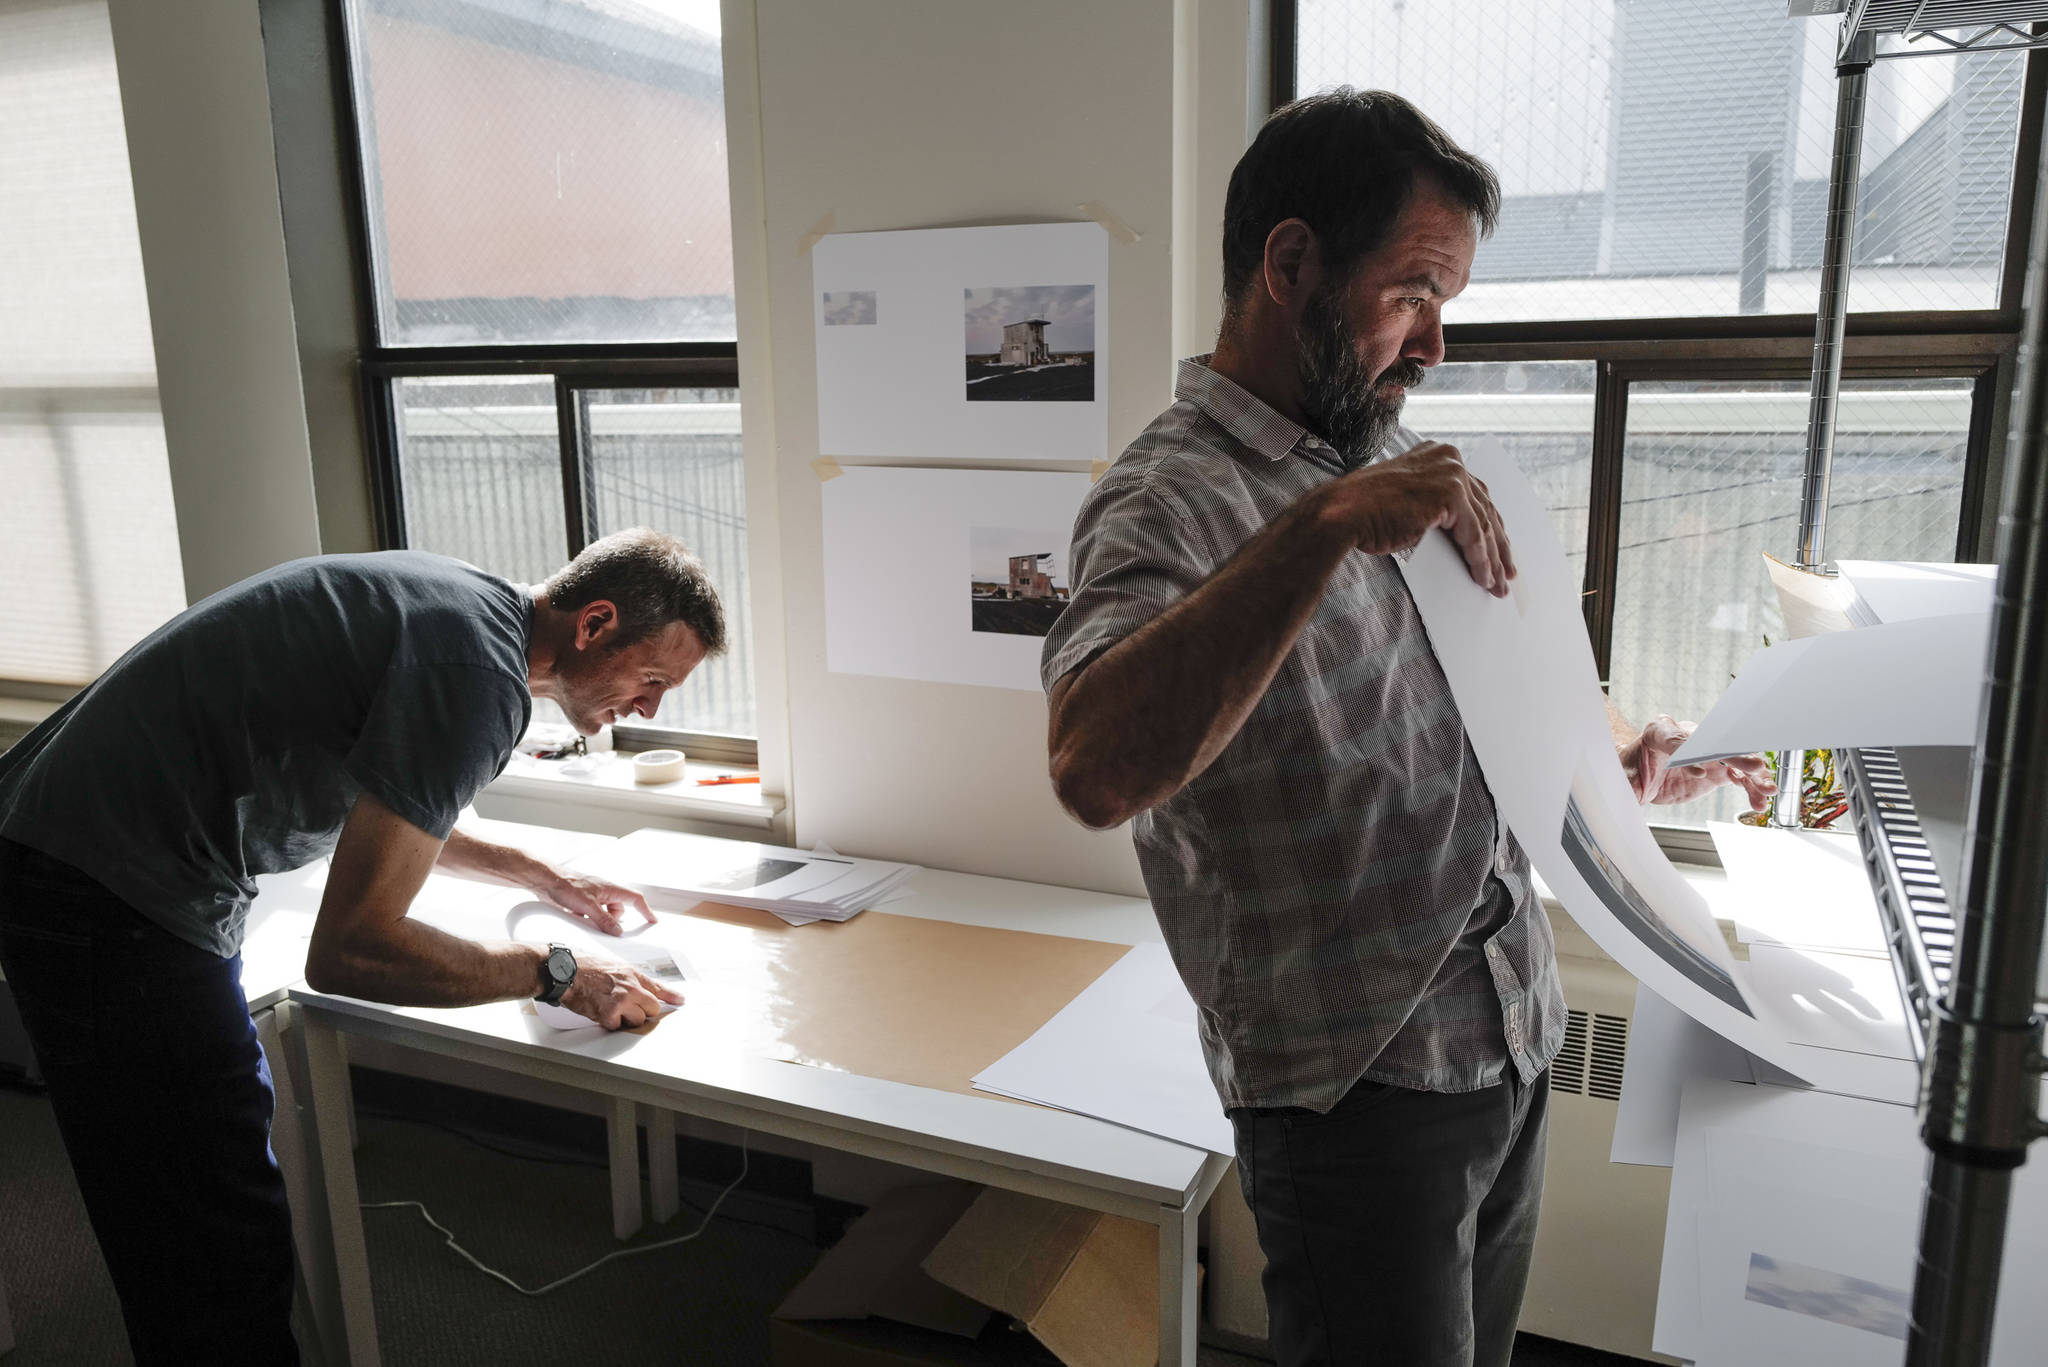 Seattle-based photographer Eirik Johnson, left, works with Ben Huff, a local photographer and editor of Ice Fog Press, on a hand-made book of Johnson’s photographs titled “Barrow Cabins” on Wednesday, Aug. 21, 2019. (Michael Penn | Juneau Empire)